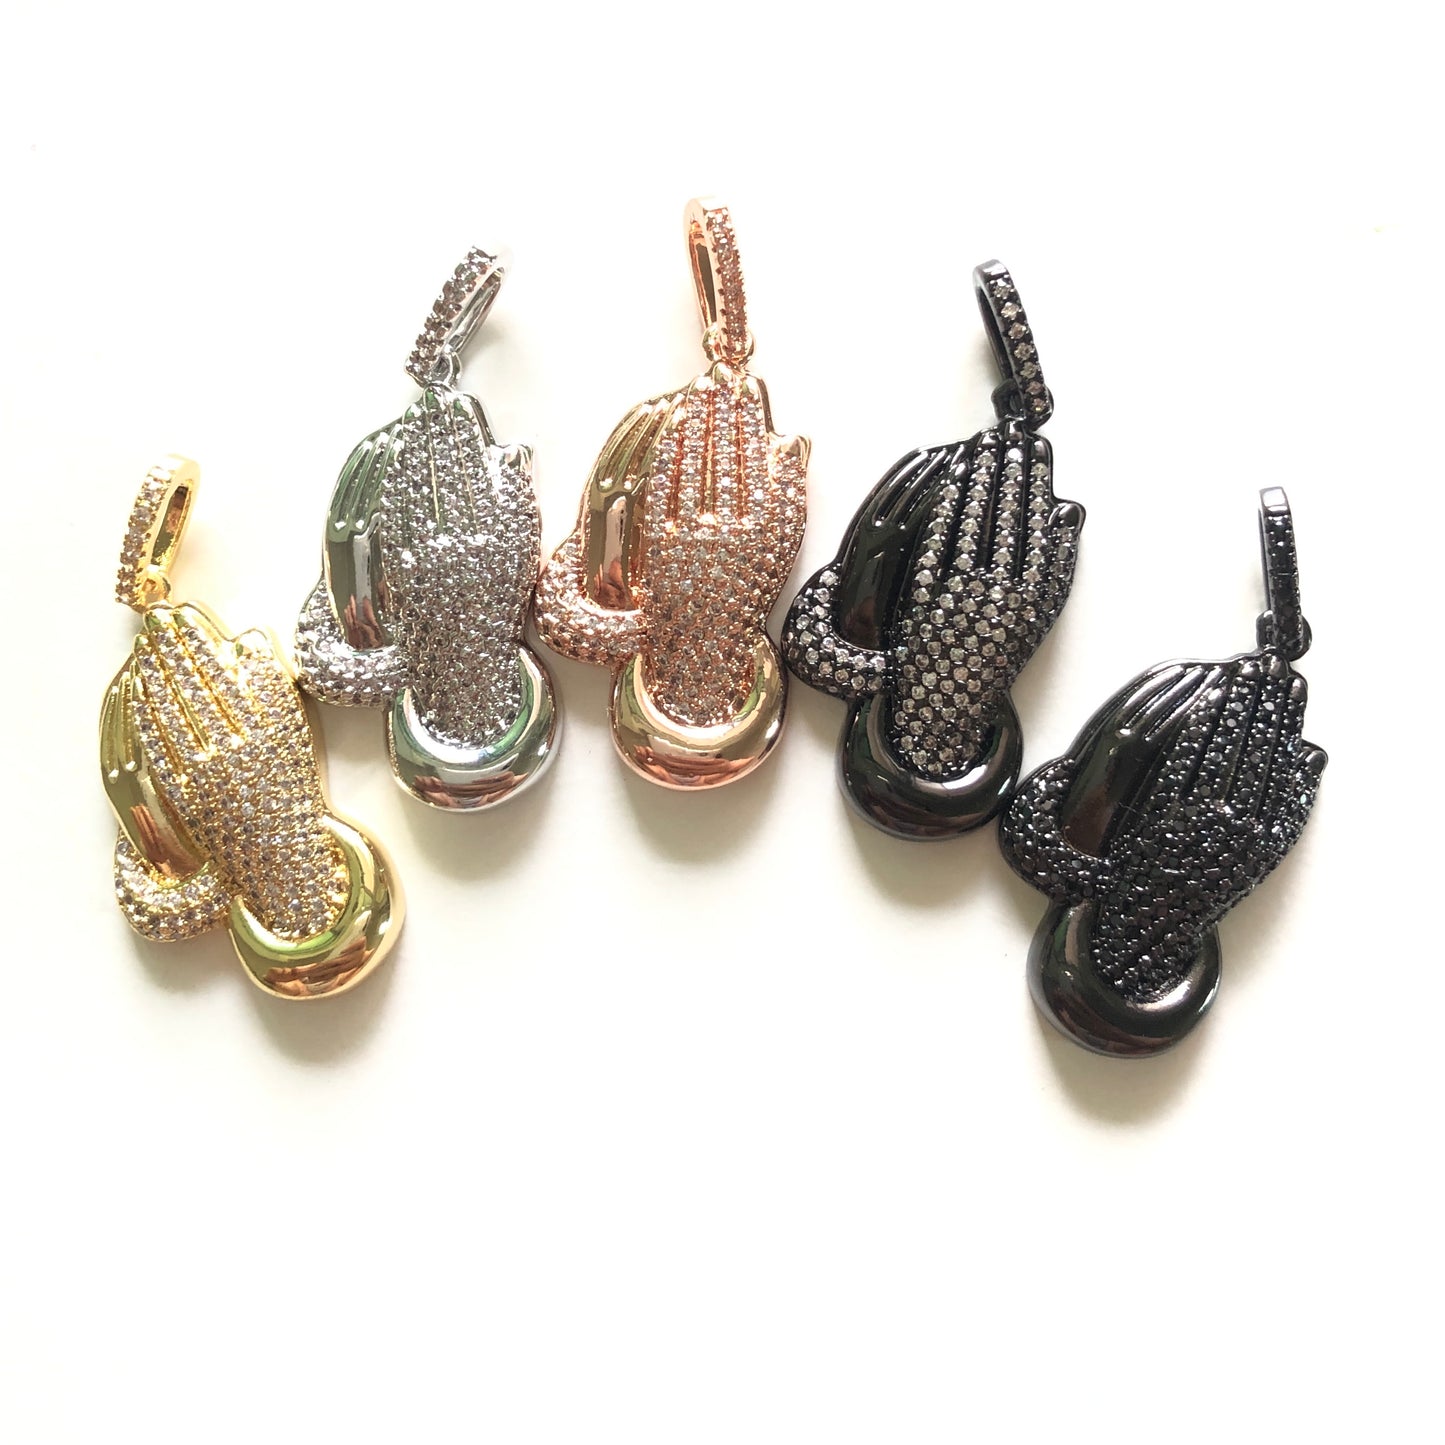 10pcs/lot 31*17mm CZ Paved Praying Hands Charms CZ Paved Charms Christian Quotes Symbols Charms Beads Beyond